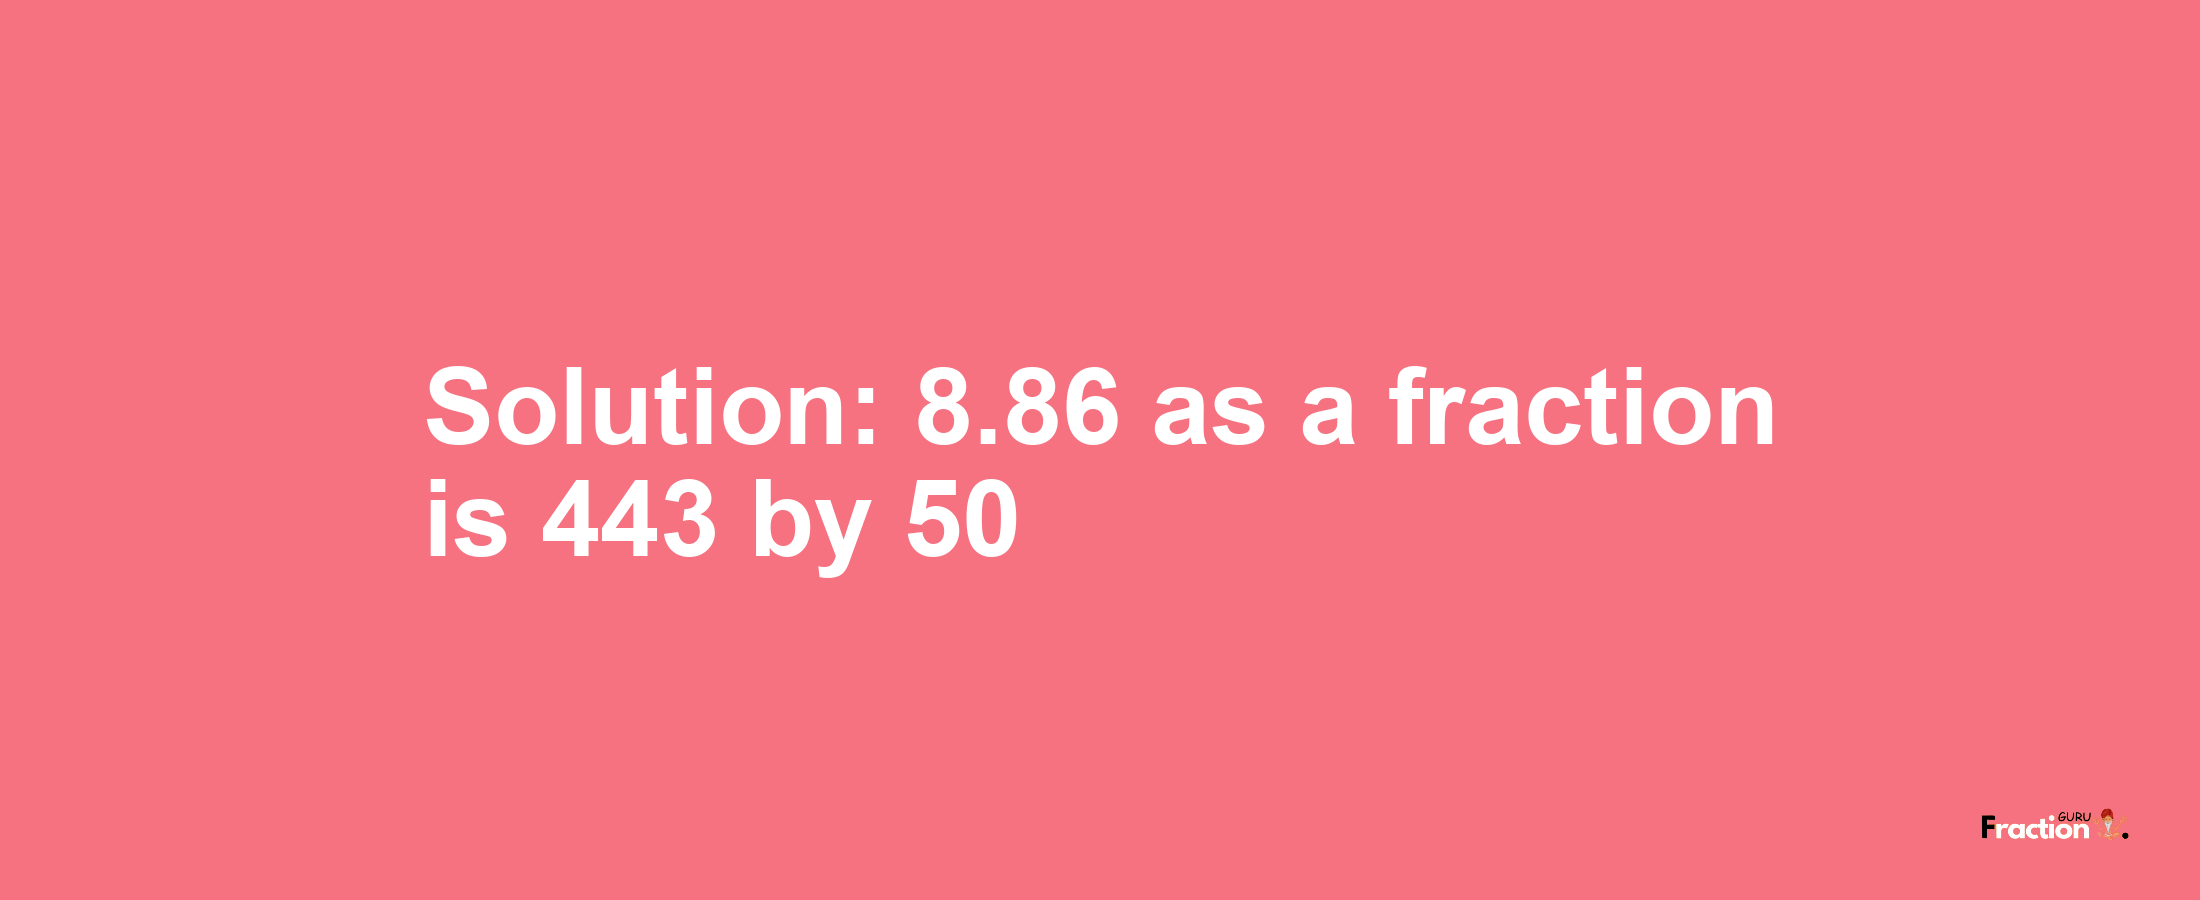 Solution:8.86 as a fraction is 443/50